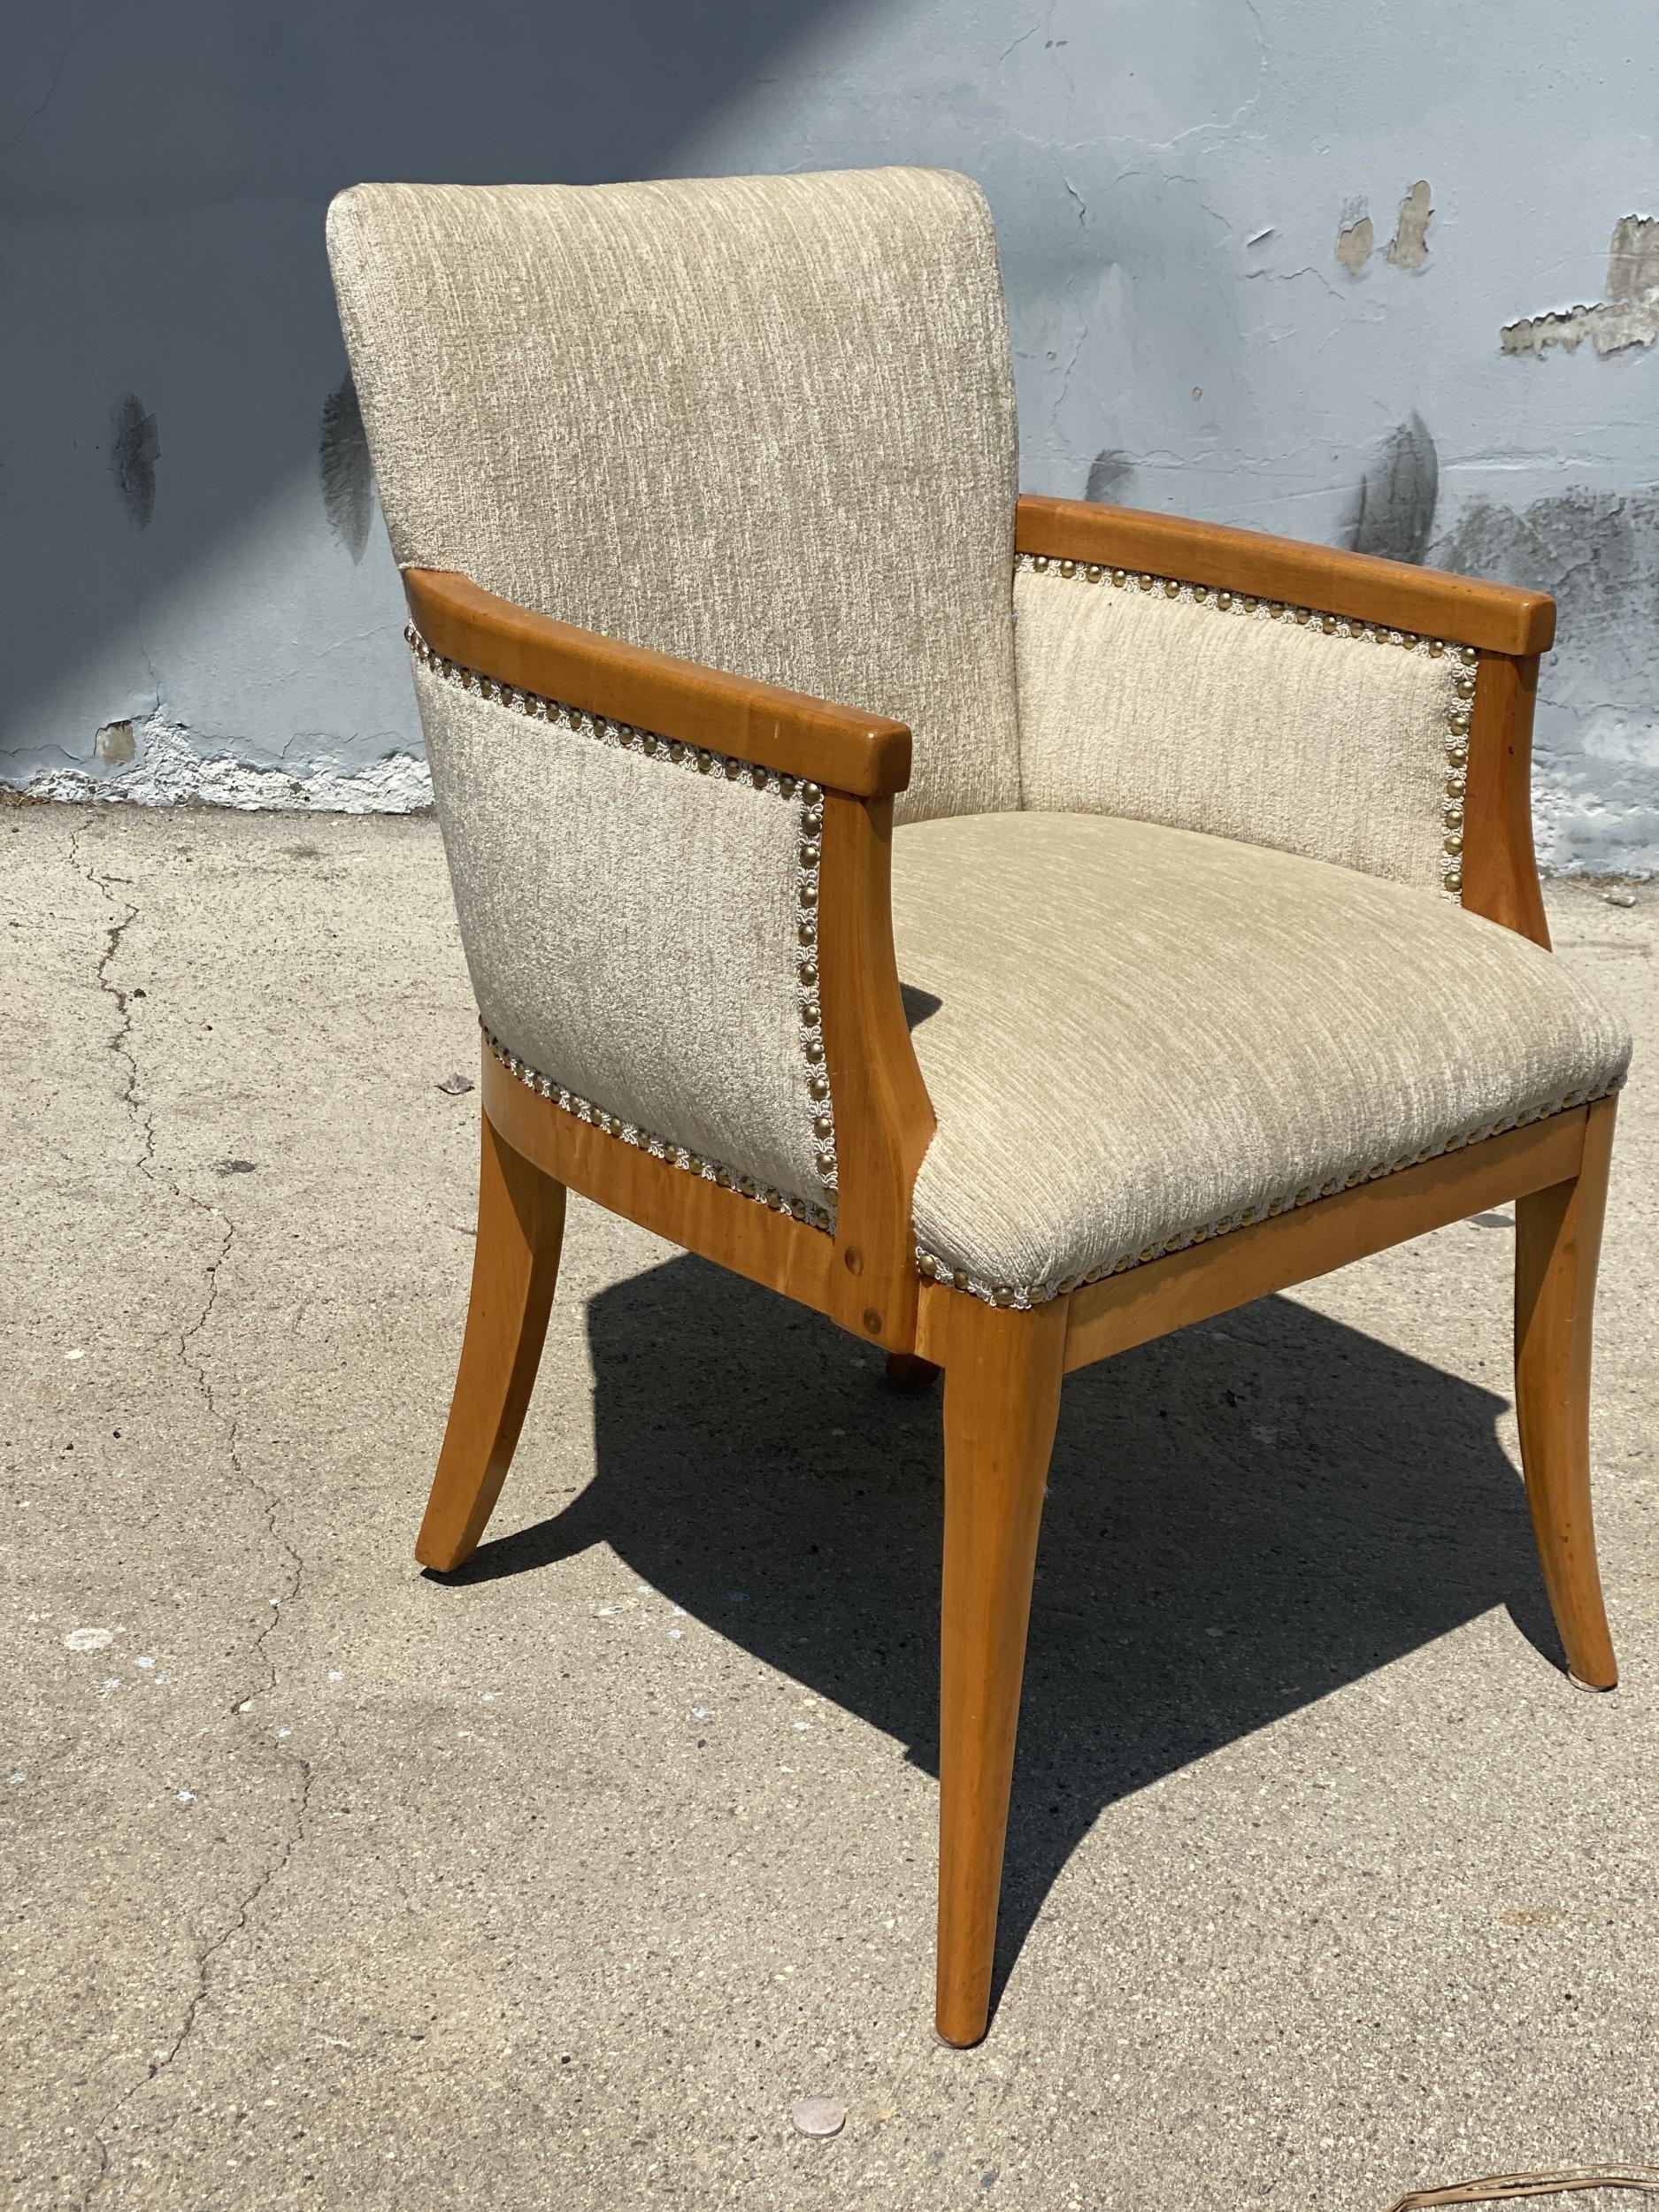 Circa 1950 modern Heywood Wakefield reading chair with stylished pouf ottoman. The chair featuring a beautiful wood border with nail-back decorative edge and tapered legs. The ottoman features a large overstuffed top and stylized tapered legs.